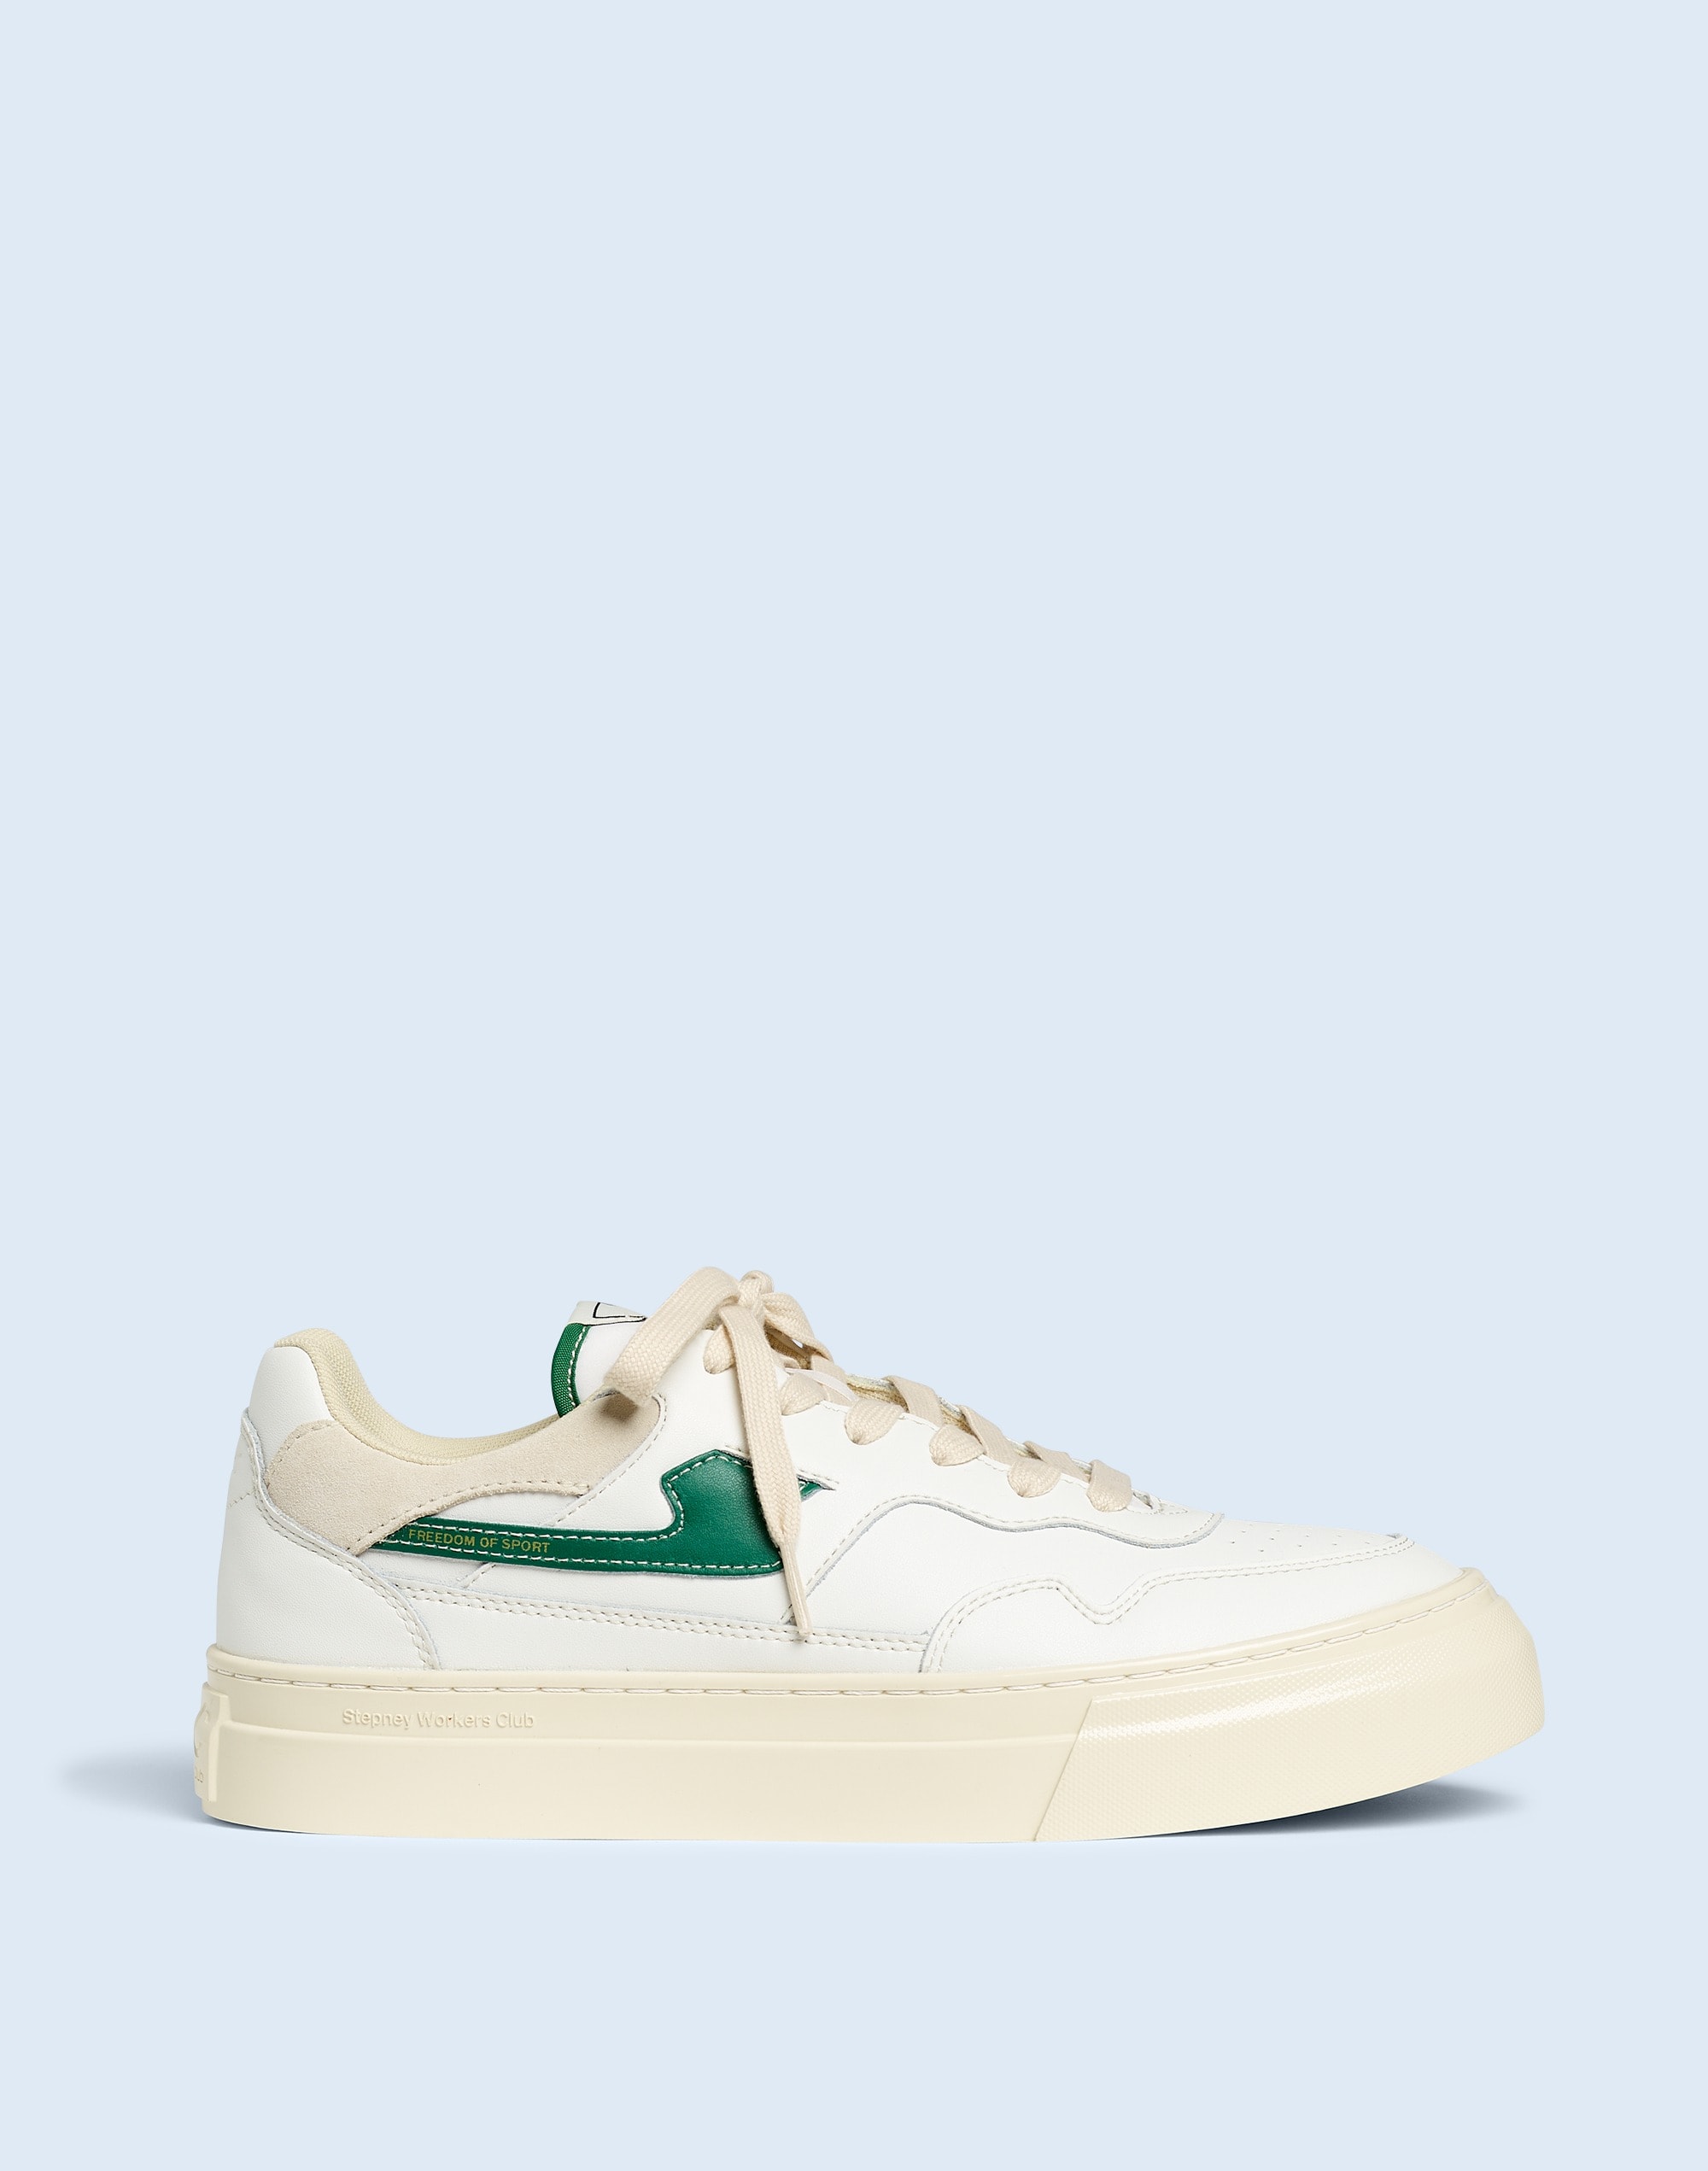 Mw Stepney Workers Club Pearl S-strike Sneakers In White And Green